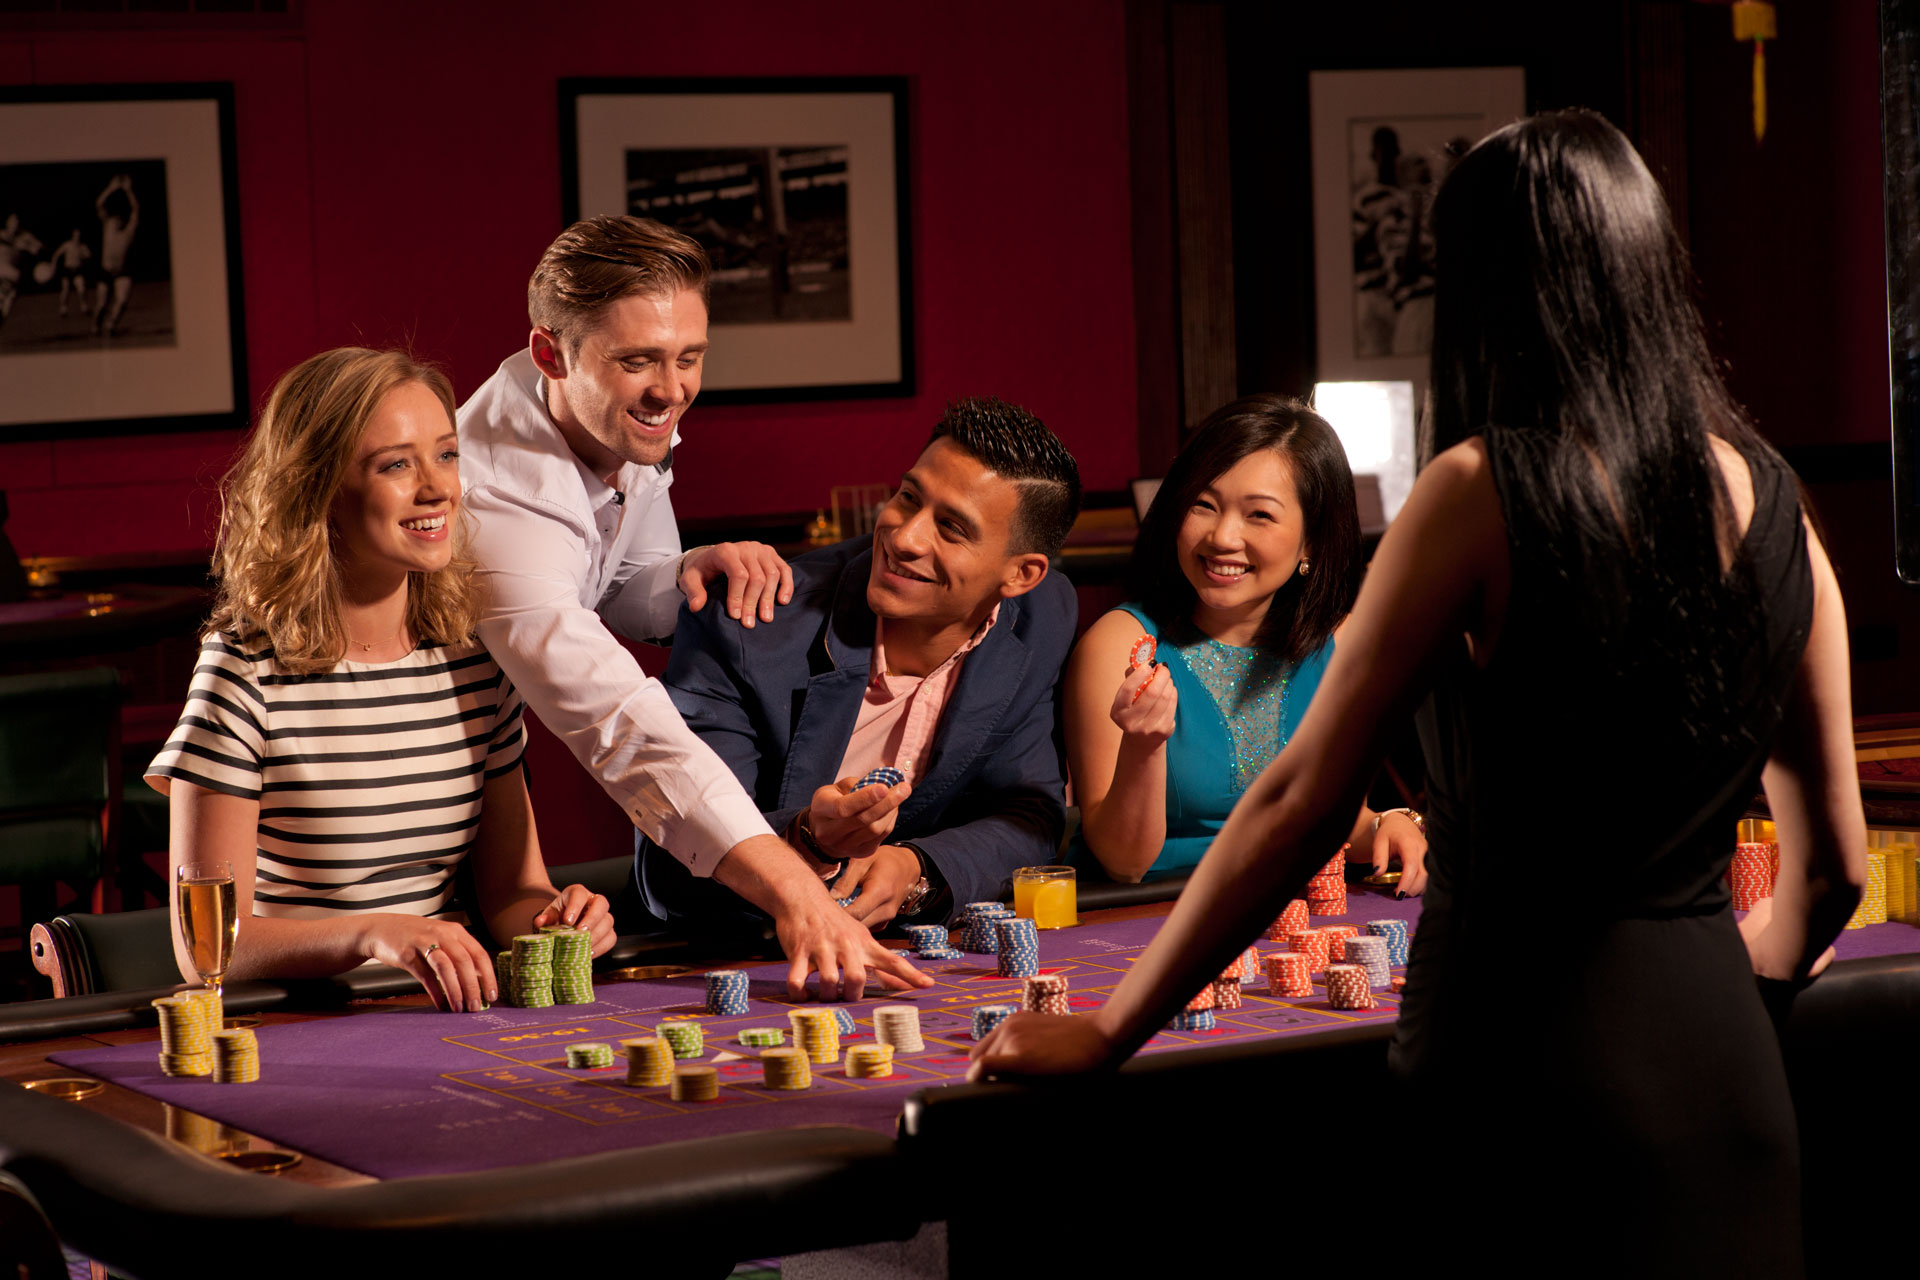 Tips for playing great online casino